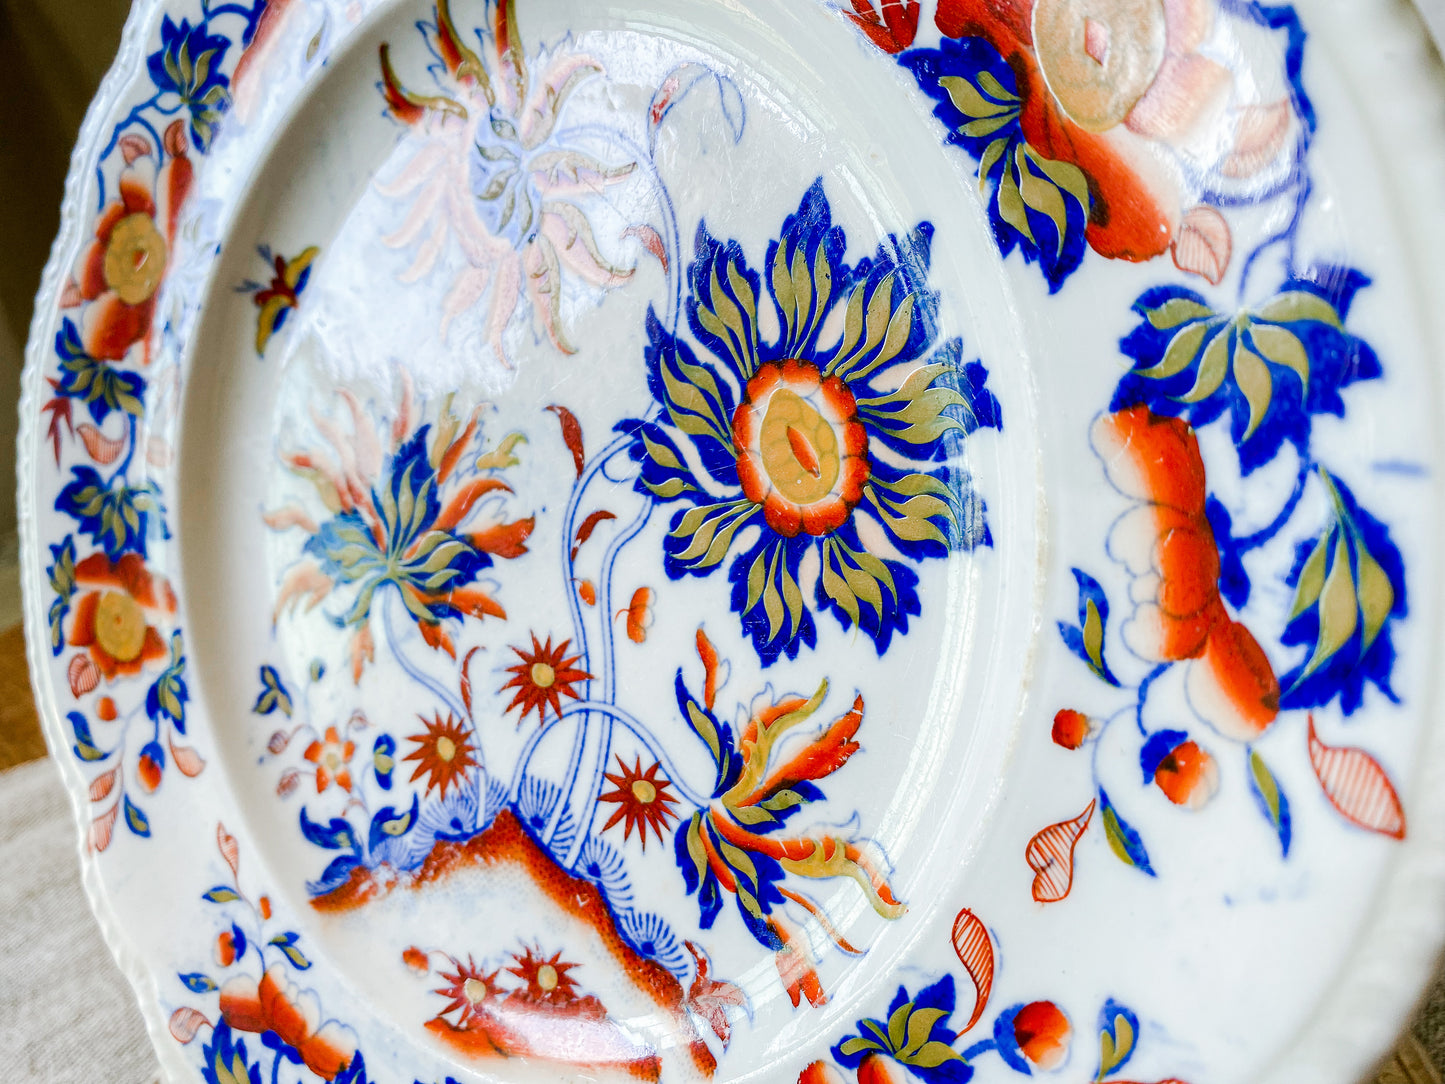 Antique Mid-1800s Ironstone Dinner Plate with Blue and Orange Floral Detail | Plate Wall Display | English Cottage Decor